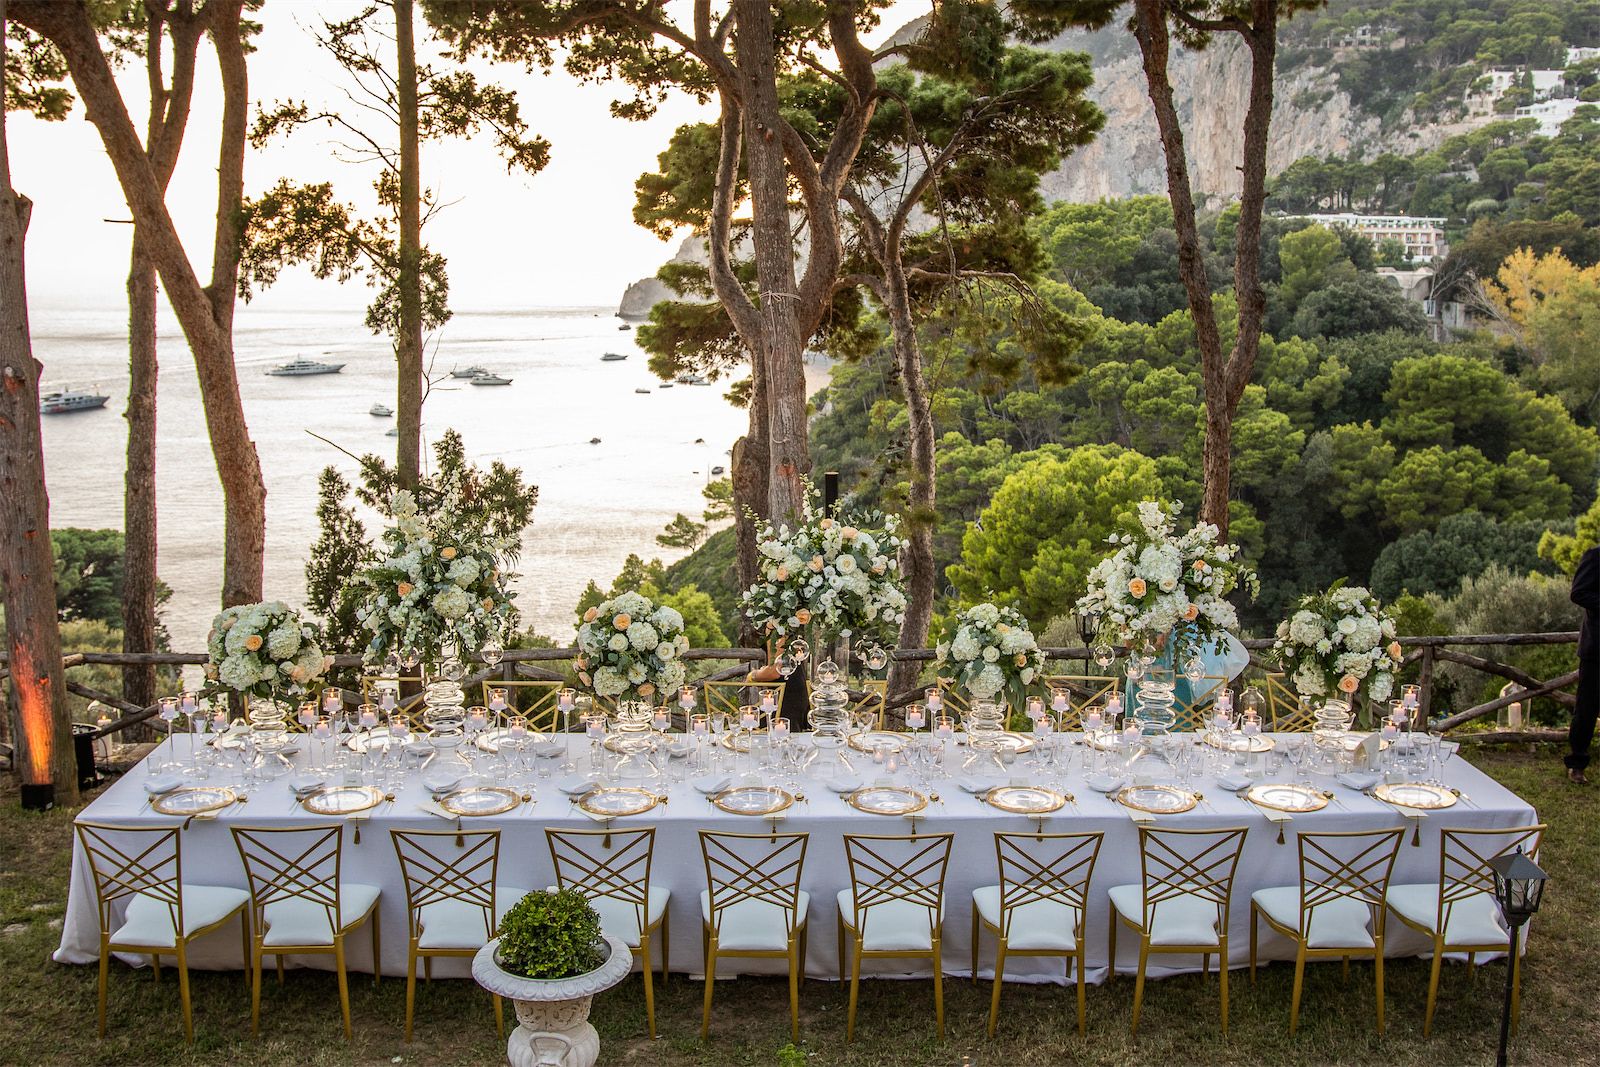 Perfecting tablewear and decor isn't the only job of a destination wedding planner. They also have to manage familial relationships. Here's a Capri-based wedding planned by Giorgia Fantin Borghi.